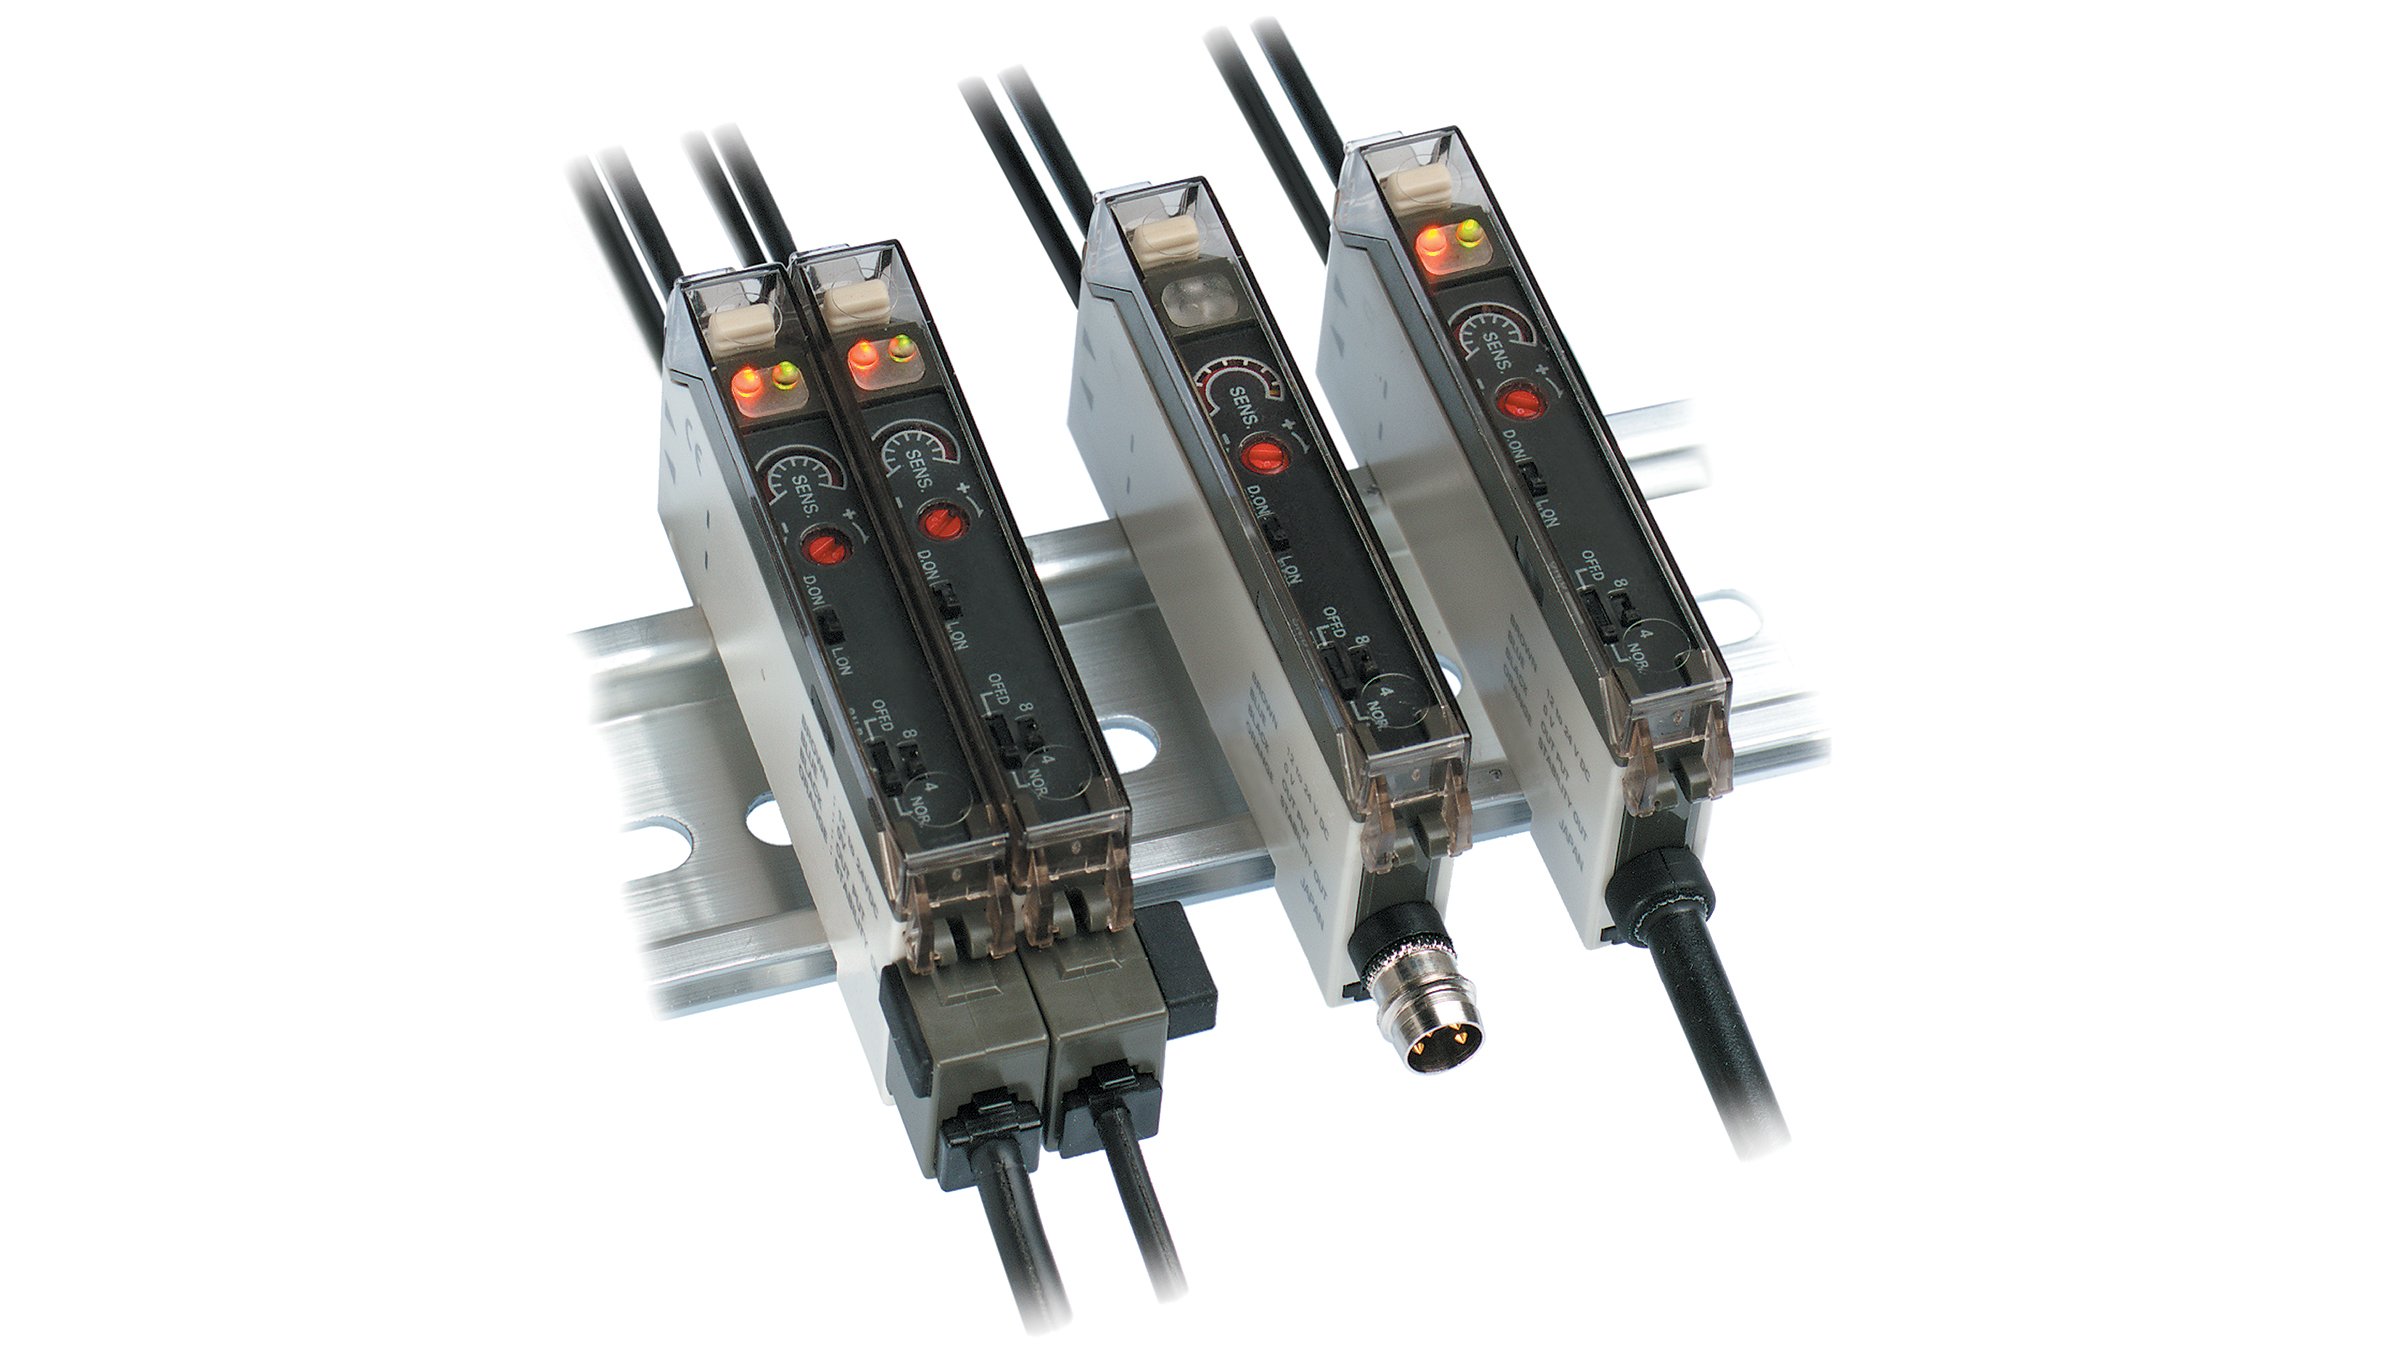 4 rectangular sensors with cables on opposite ends, mounted on a DIN rail